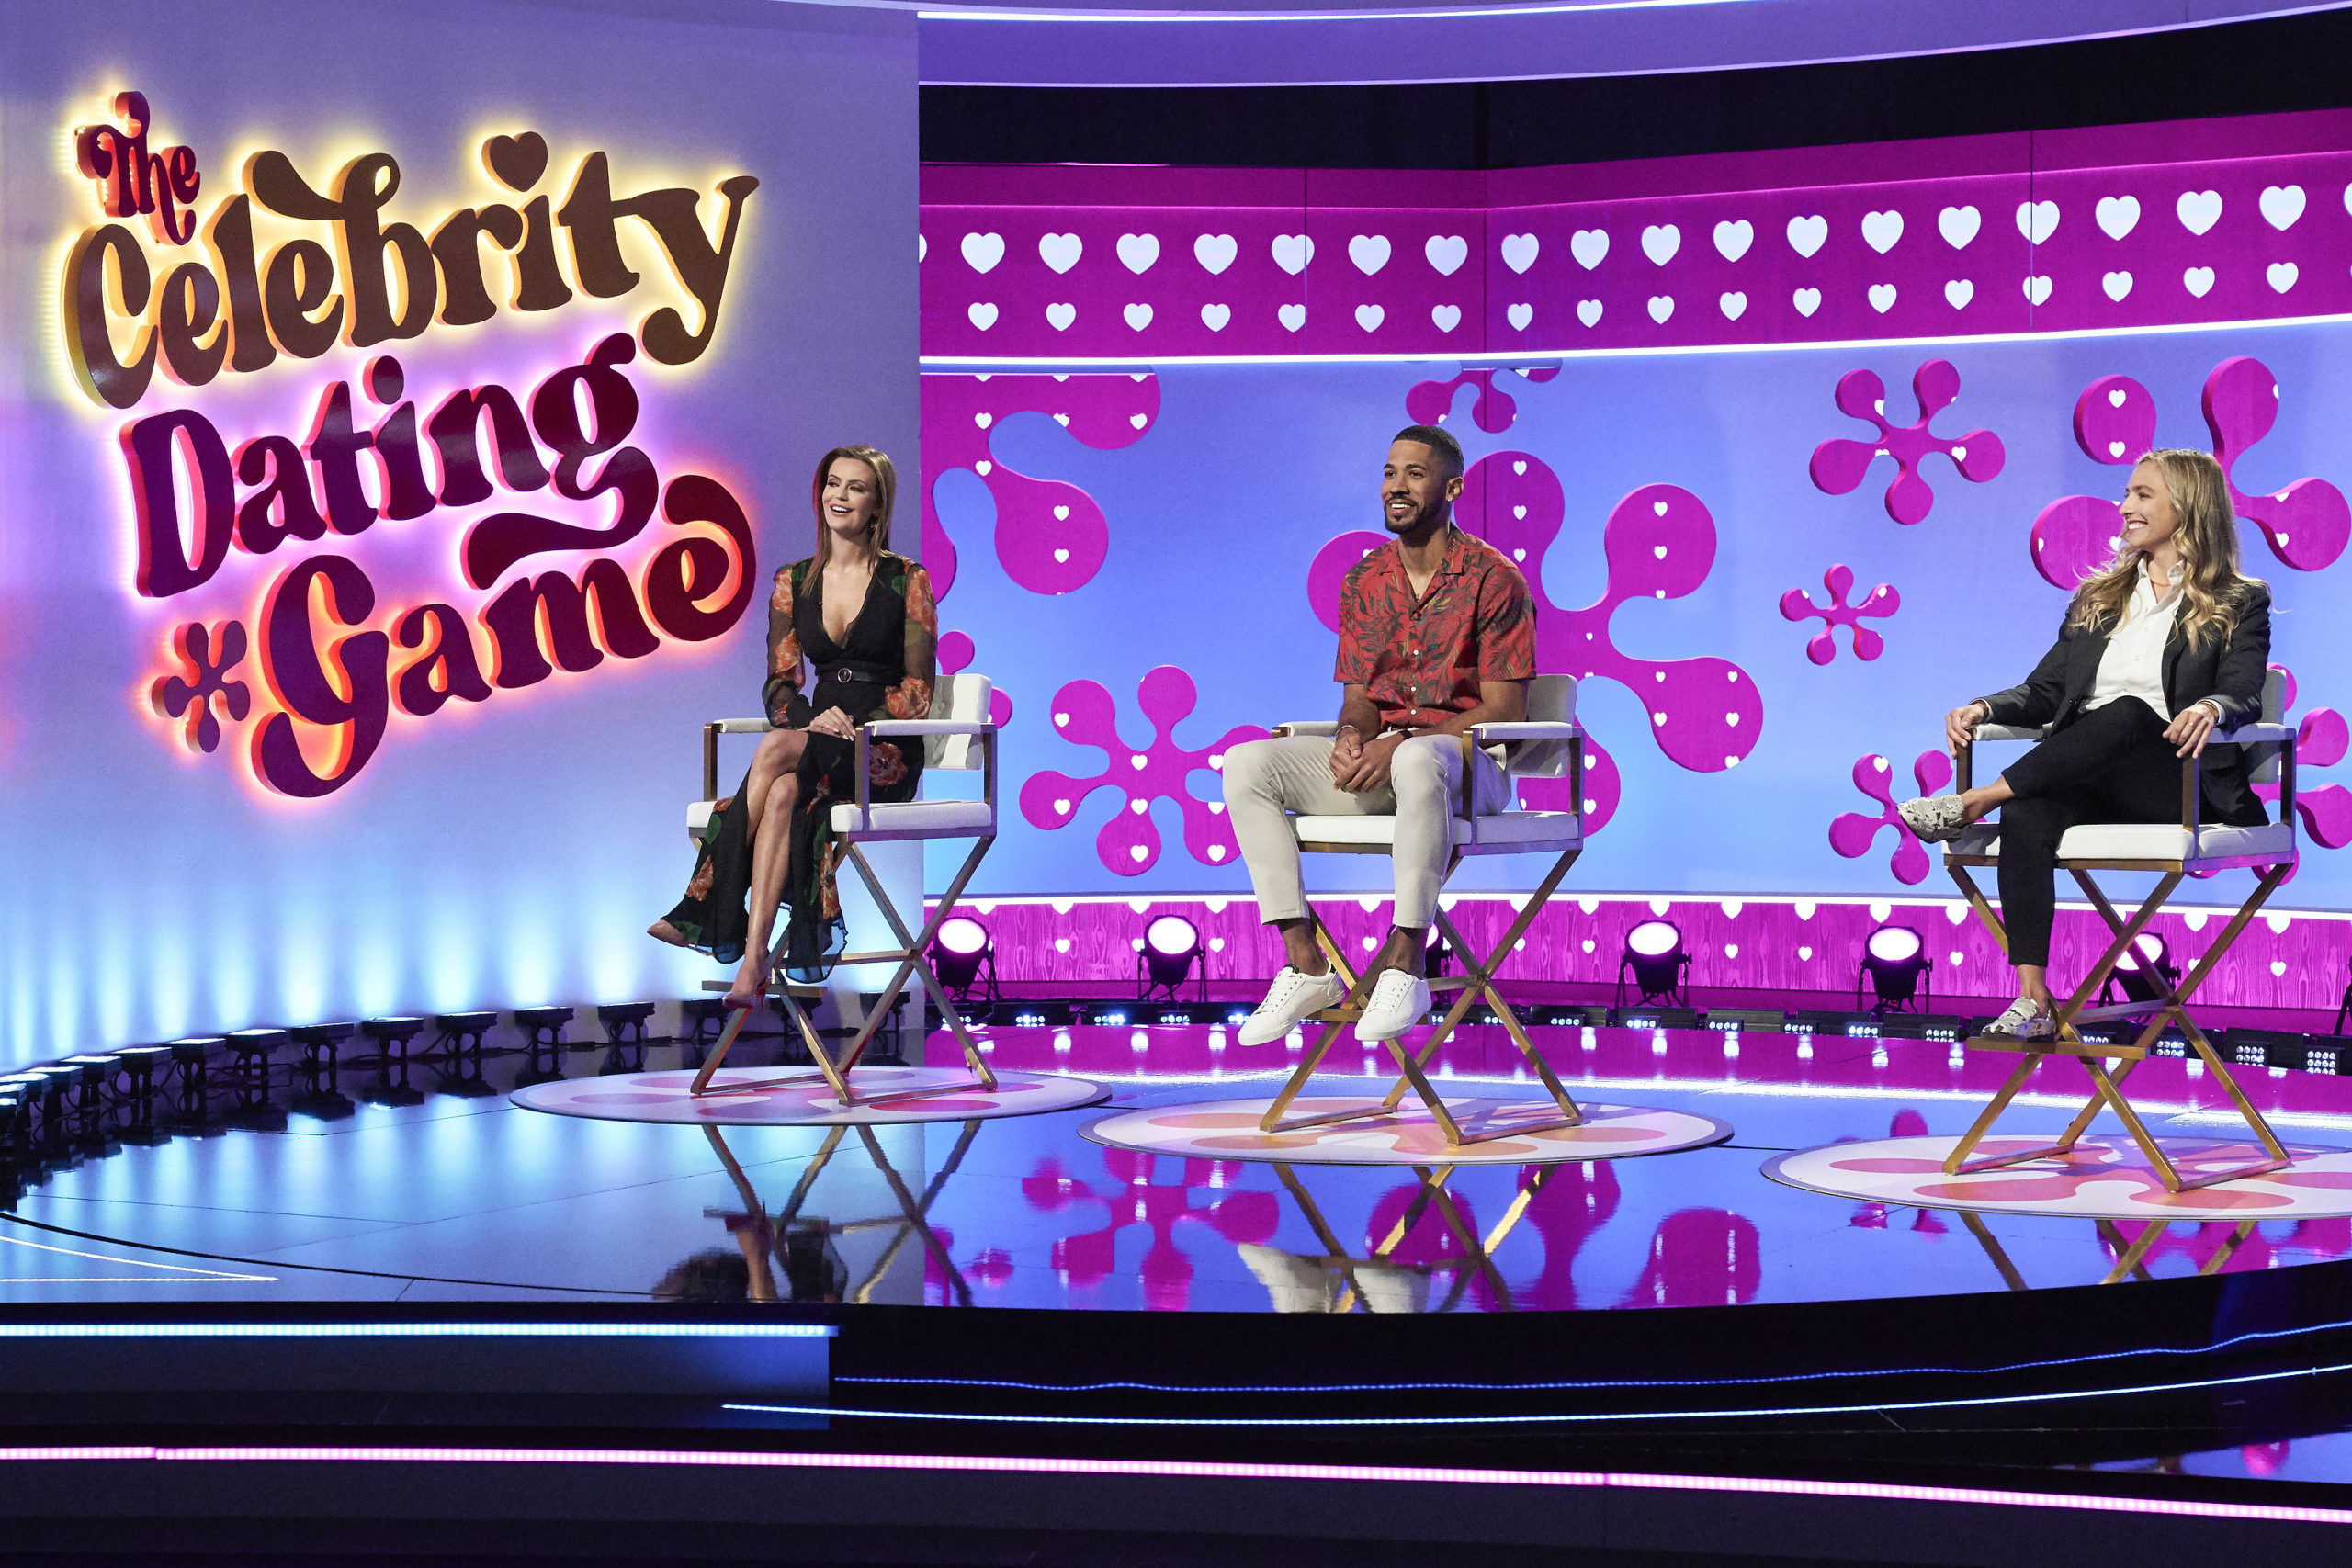 #The Celebrity Dating Game: Cancelled, No Second Season for ABC TV Series (Report)